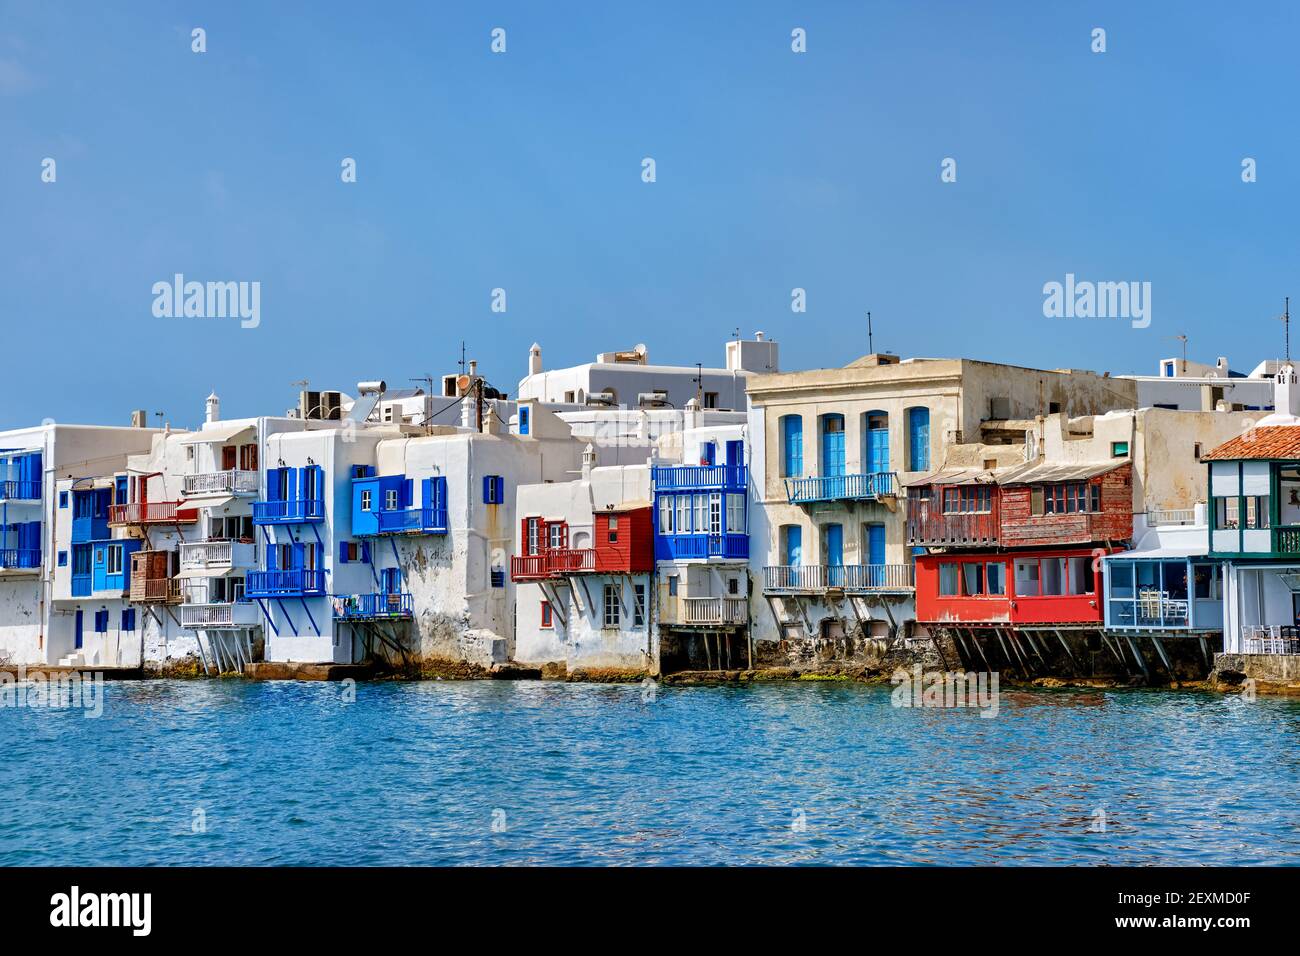 Seafront Little Venice of Mykonos town or Chora, Cyclades, Greece. Bars, cafes, restaurants in whitewashed old houses hang on cliffs above sea waves. Stock Photo